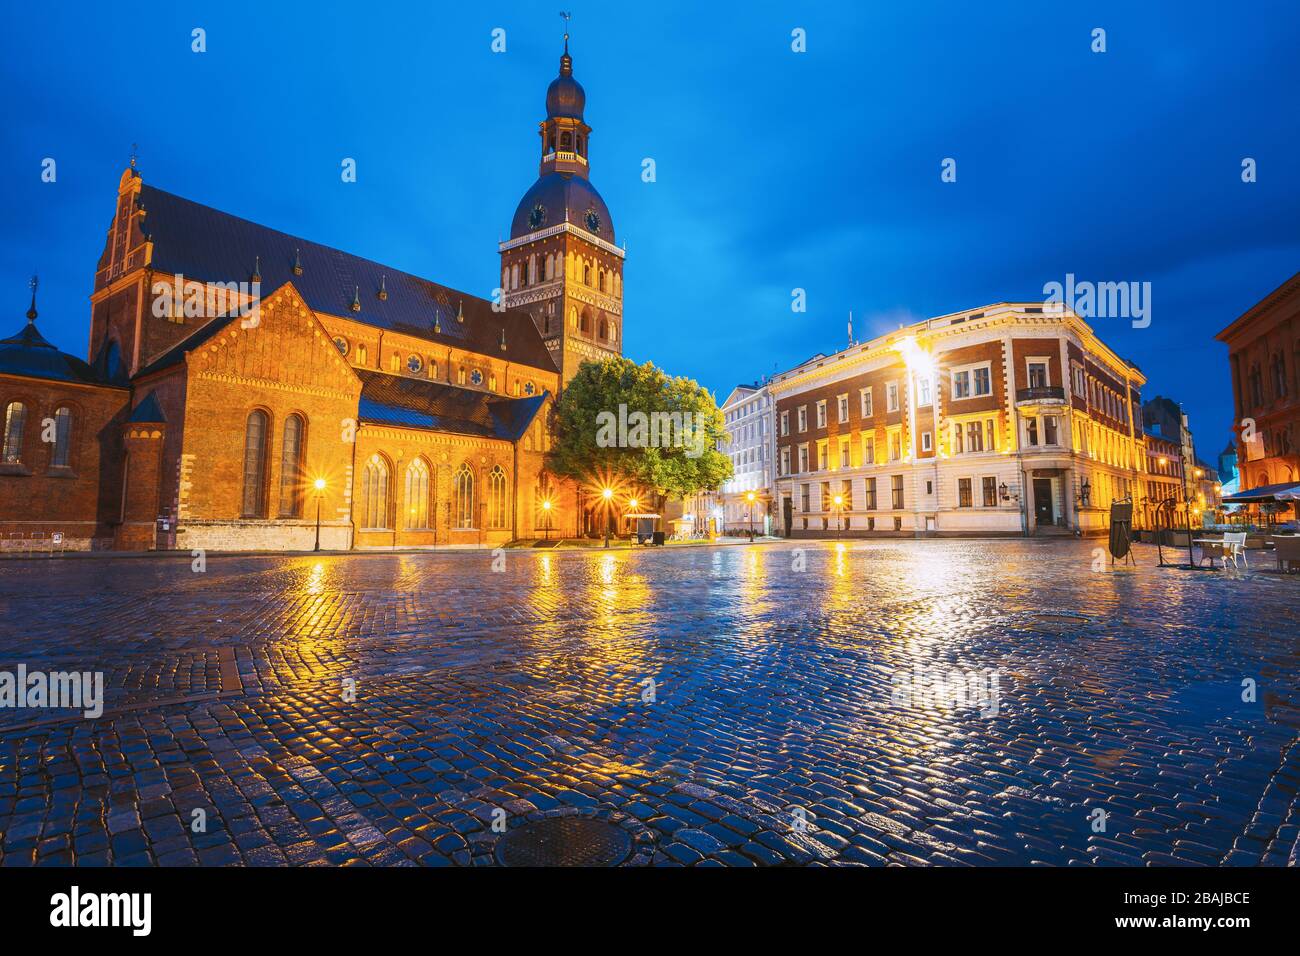 Riga, Latvia. View Of Dome Square And Dome Cathedral In Evening Illumination Under Blue Sky. Ancient Medieval Monument Of Old Town, Architectural Heri Stock Photo